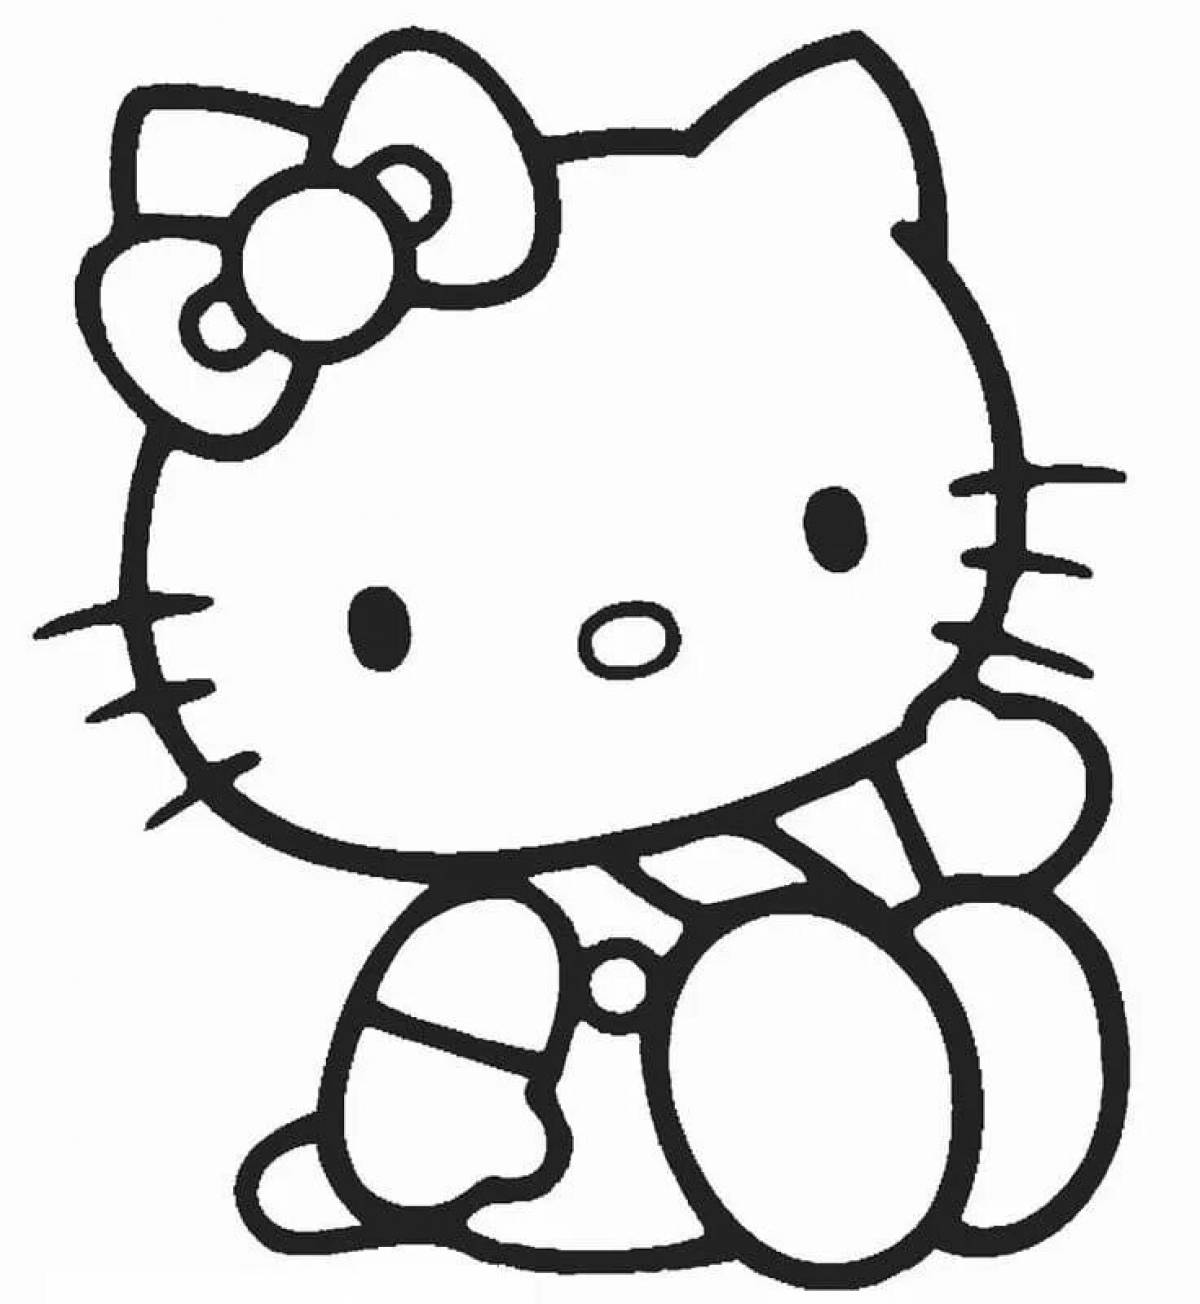 Fun coloring hello kitty and her friends